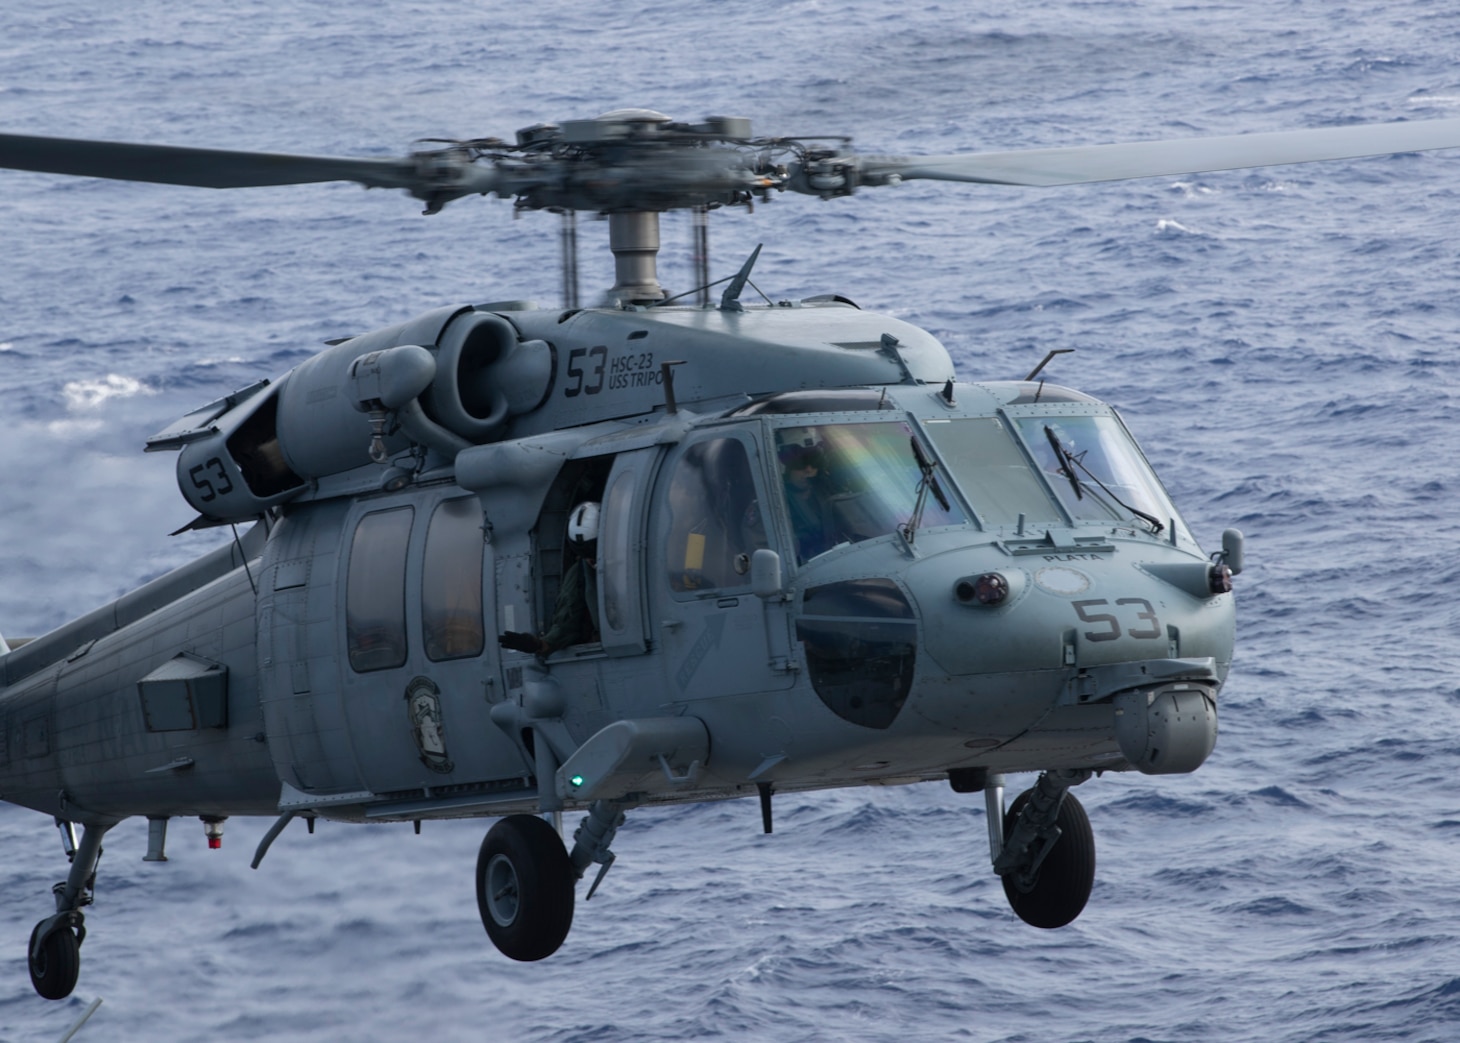 An MH-60S Sea Hawk helicopter assigned to Helicopter Sea Combat Squadron (HSC) 23 takes off from the flight deck of the amphibious assault ship USS Tripoli (LHA 7) Sept. 19, 2022.